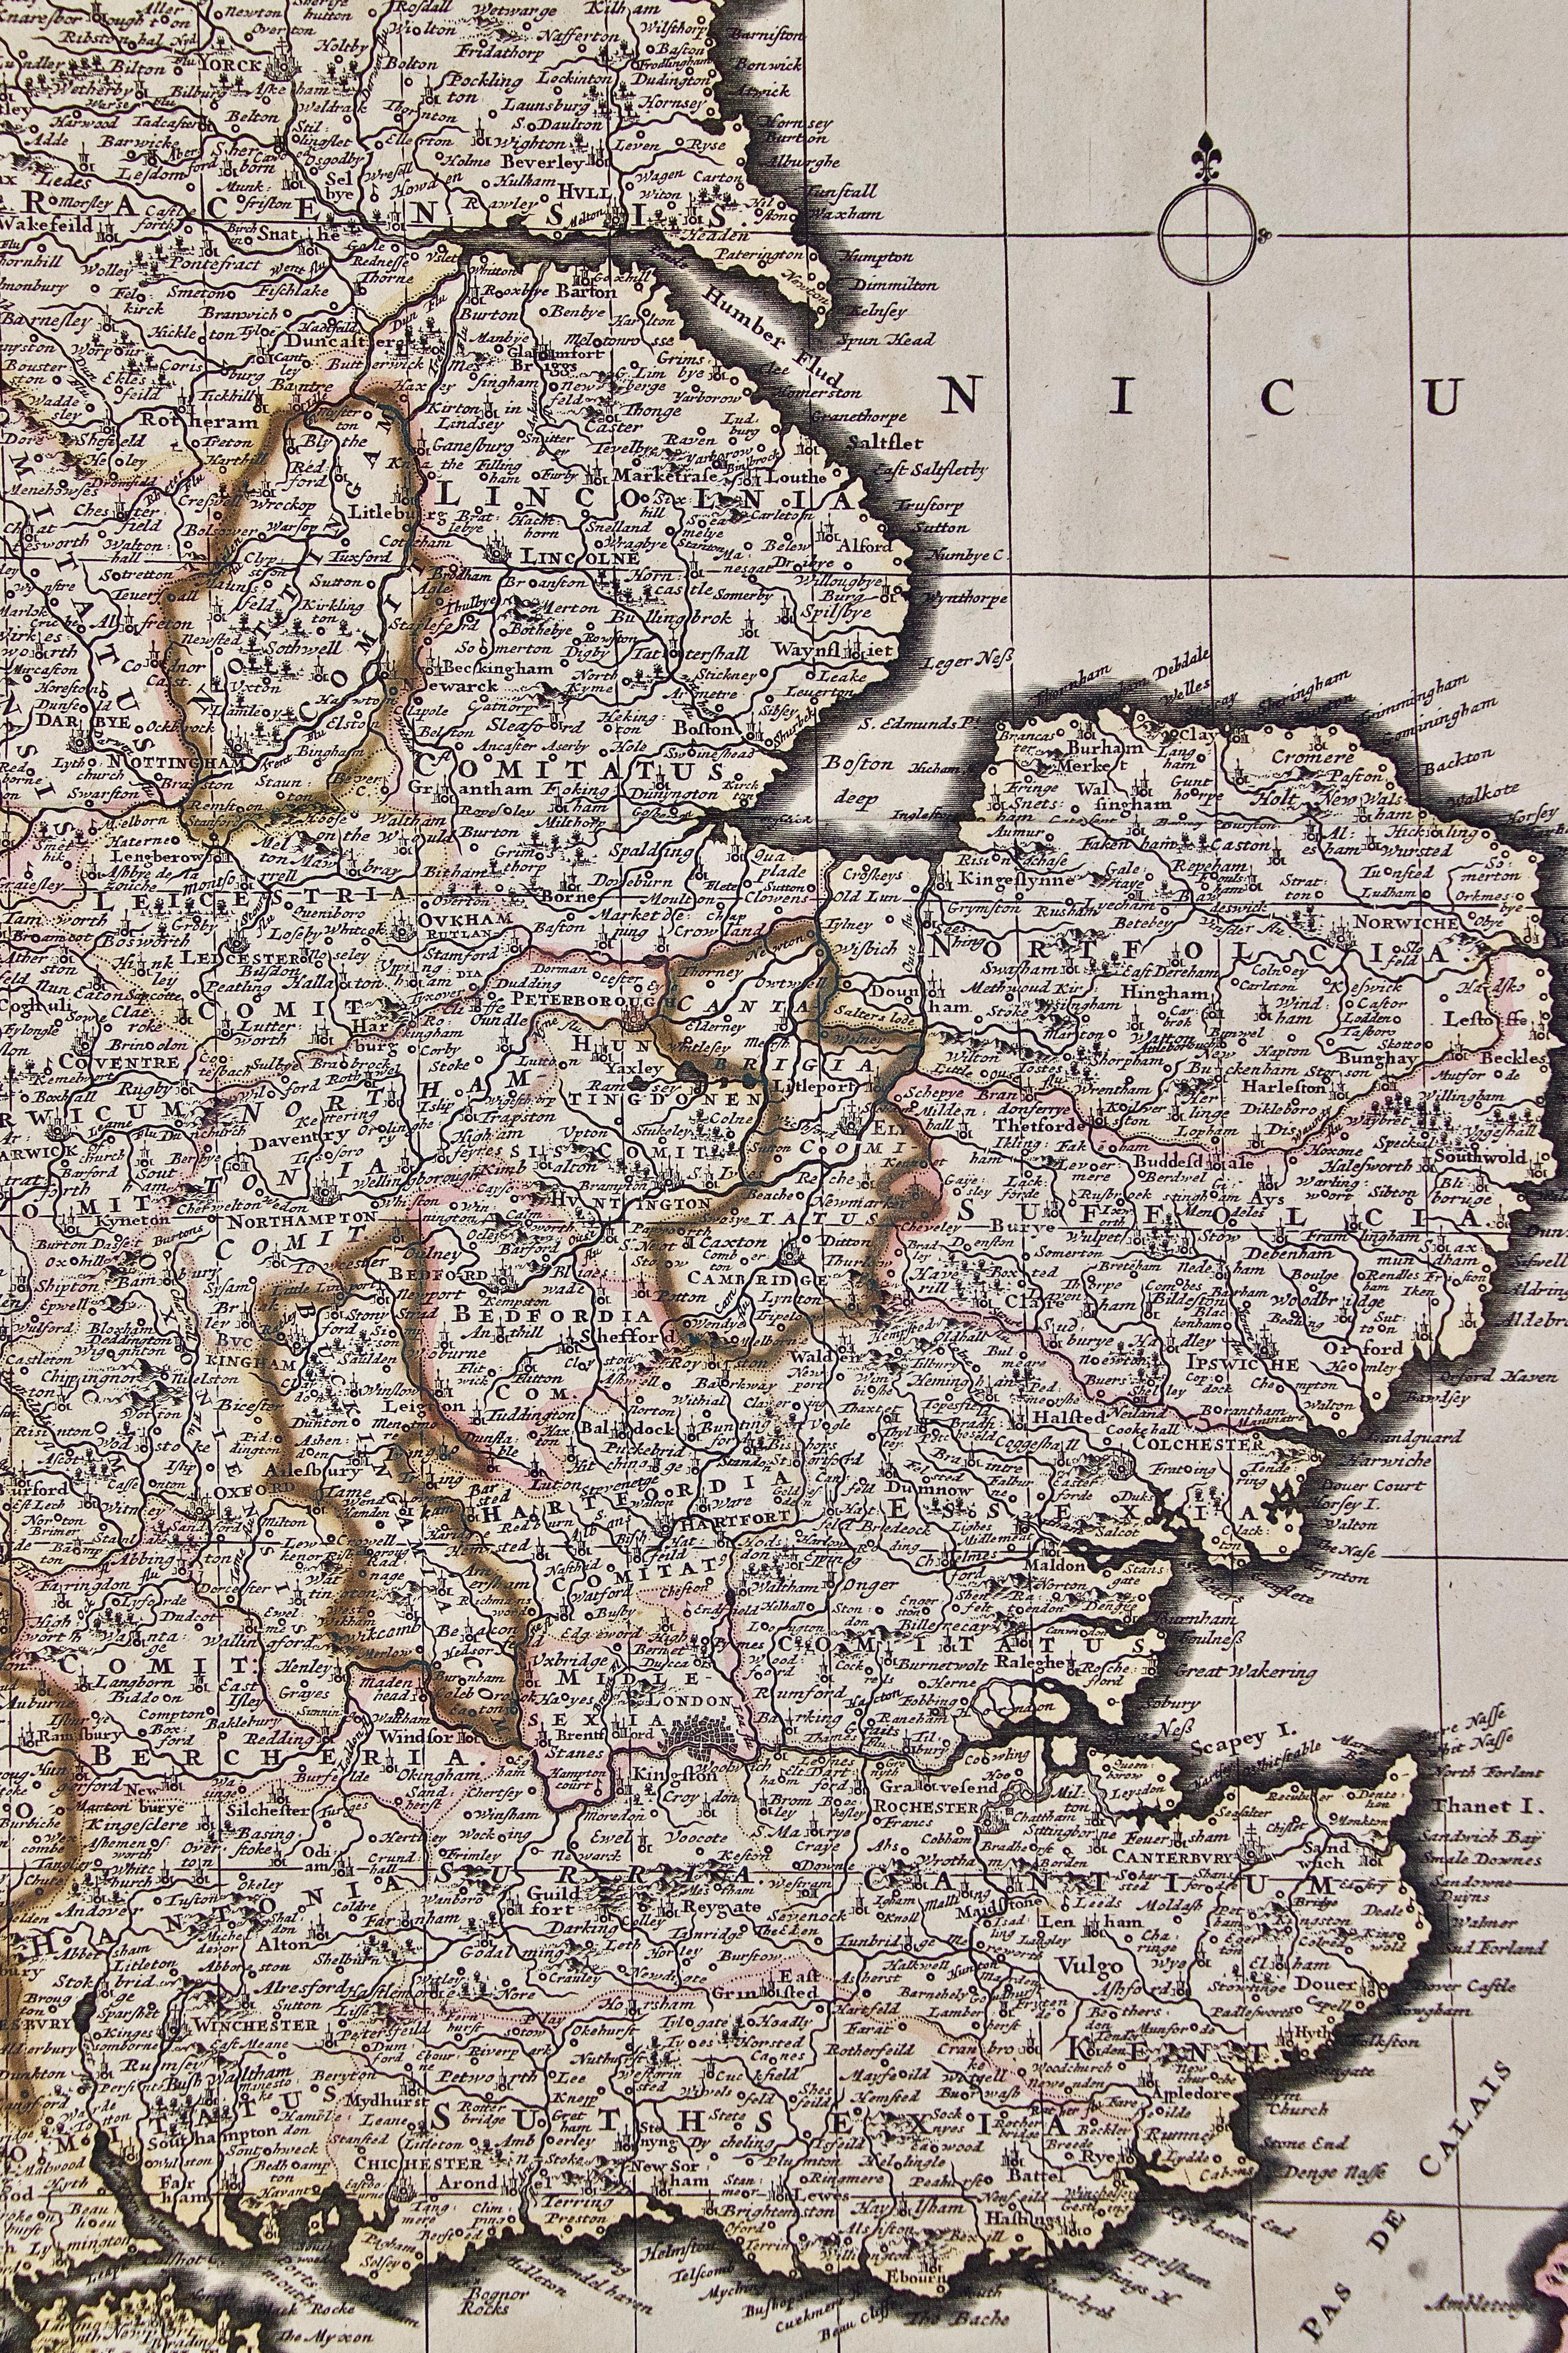 This is a large hand-colored 17th century map of England and the British Isles by Frederick de Wit entitled 